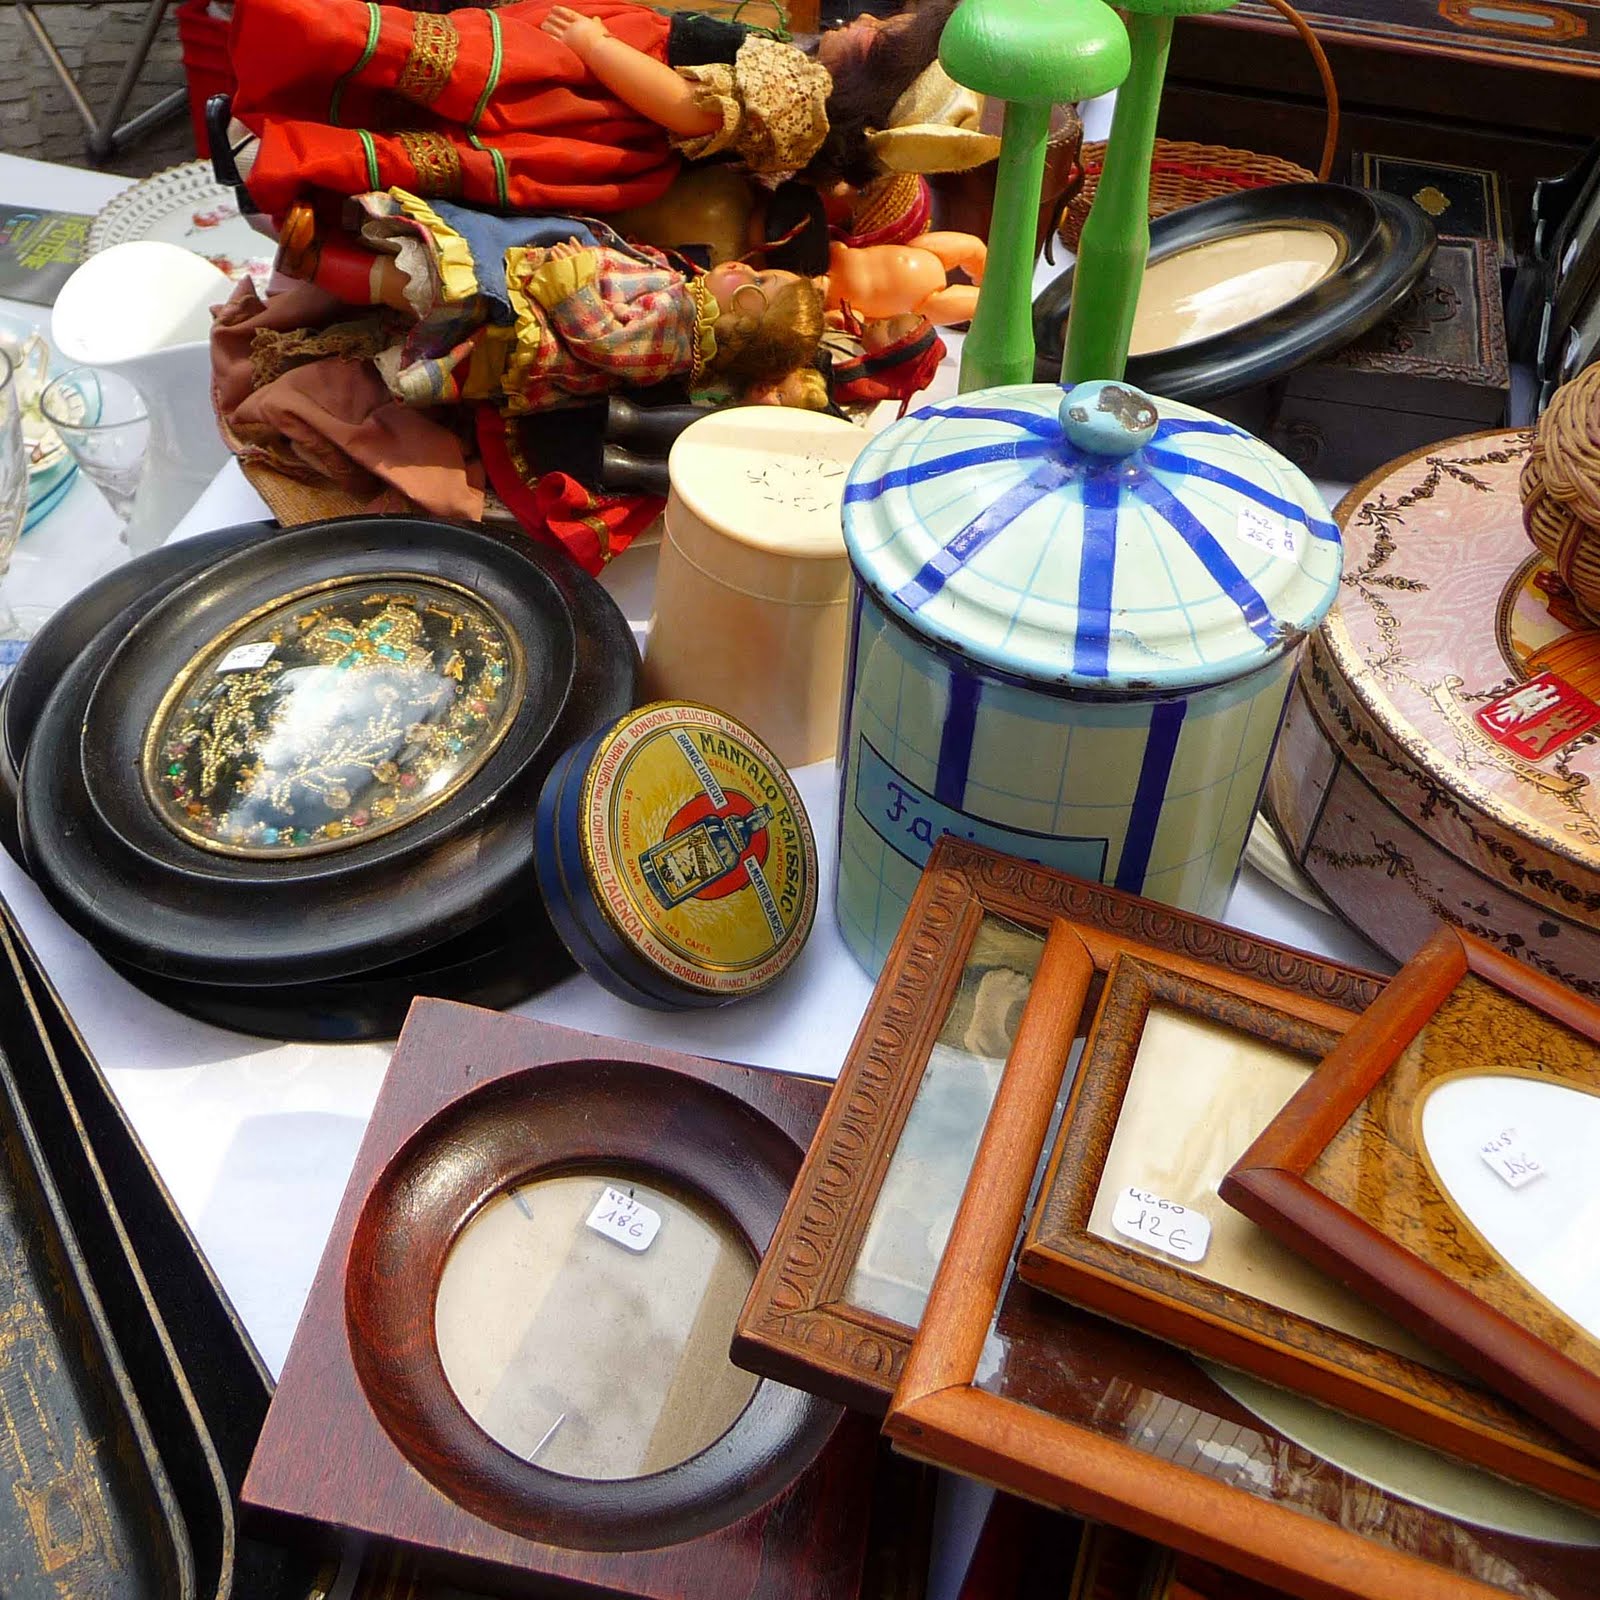 Brocantes And Flea Markets: Finding Vintage French Decor Treasures